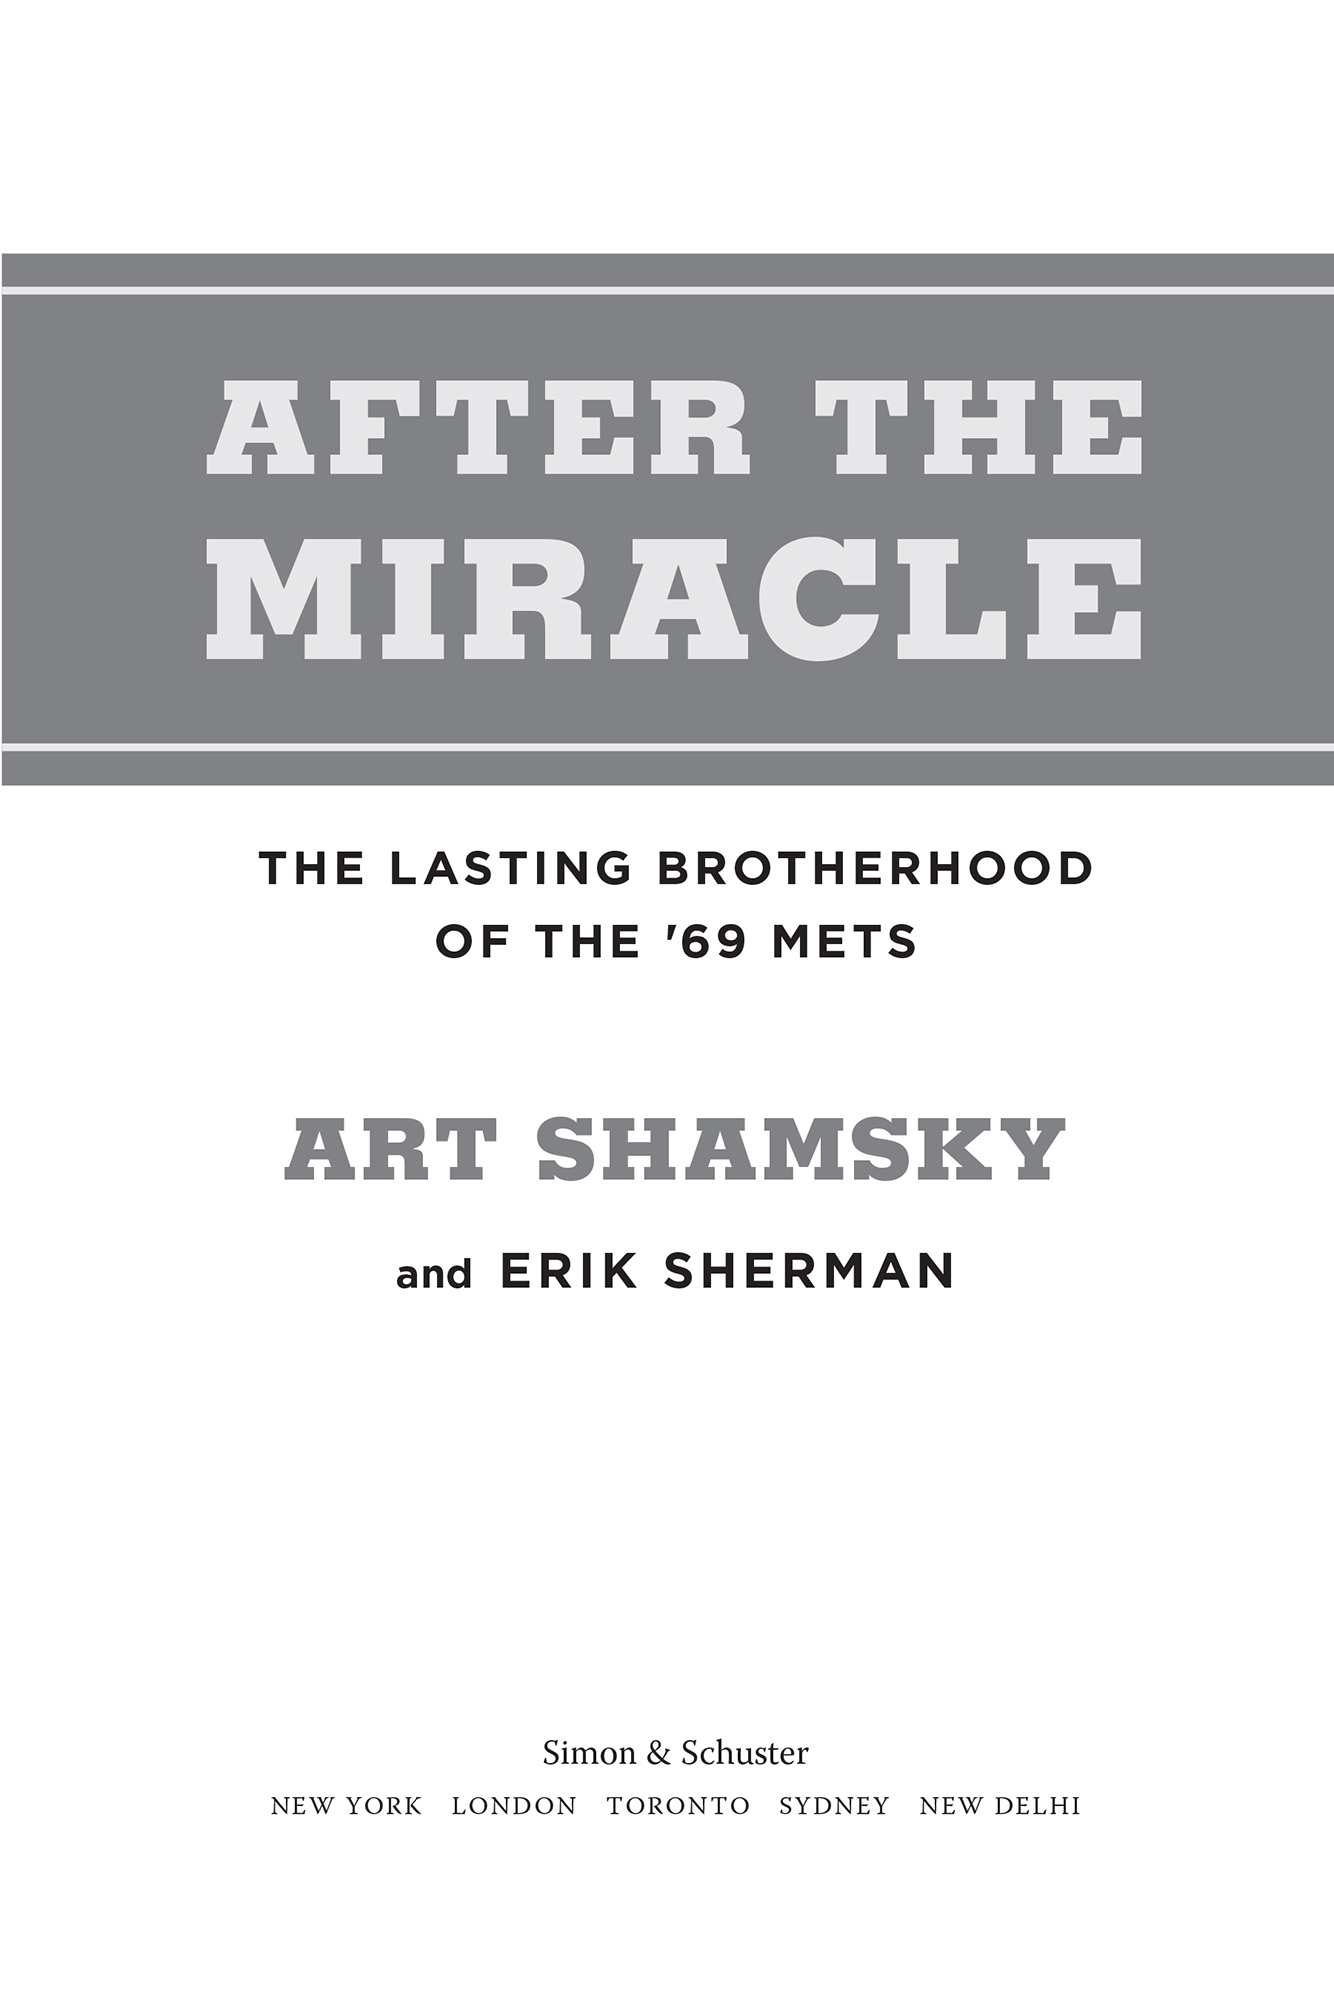 After the miracle the lasting brotherhood of the 1969 Mets - image 1